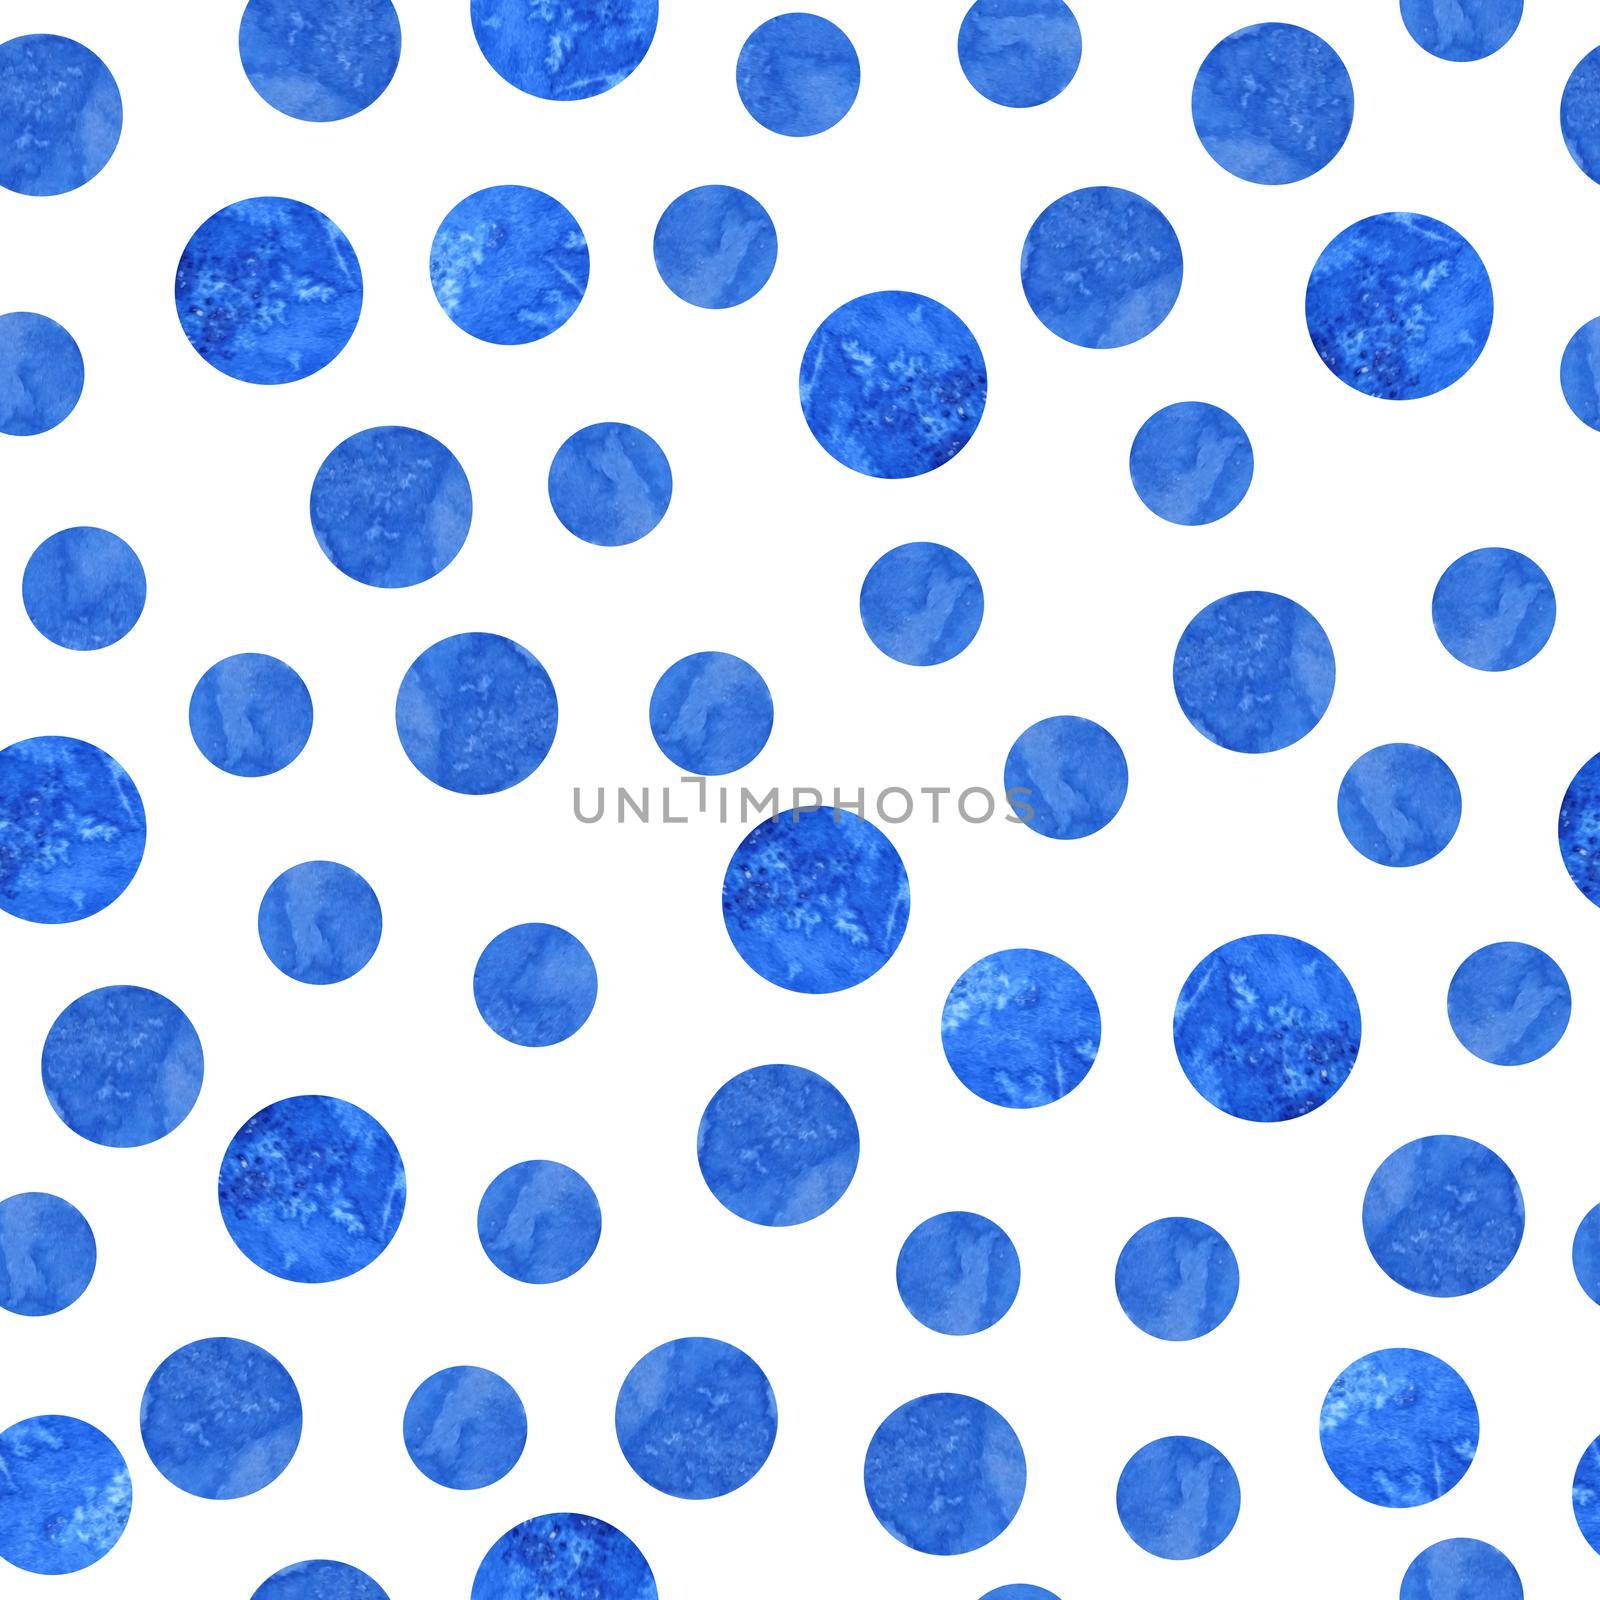 seamless watercolor hand drawn trendy pattern with modern contemporary geometric shapes. Round circle polka dot minimalism elements. Electric deep classic blue navy colors. Loose elements, minimalist design